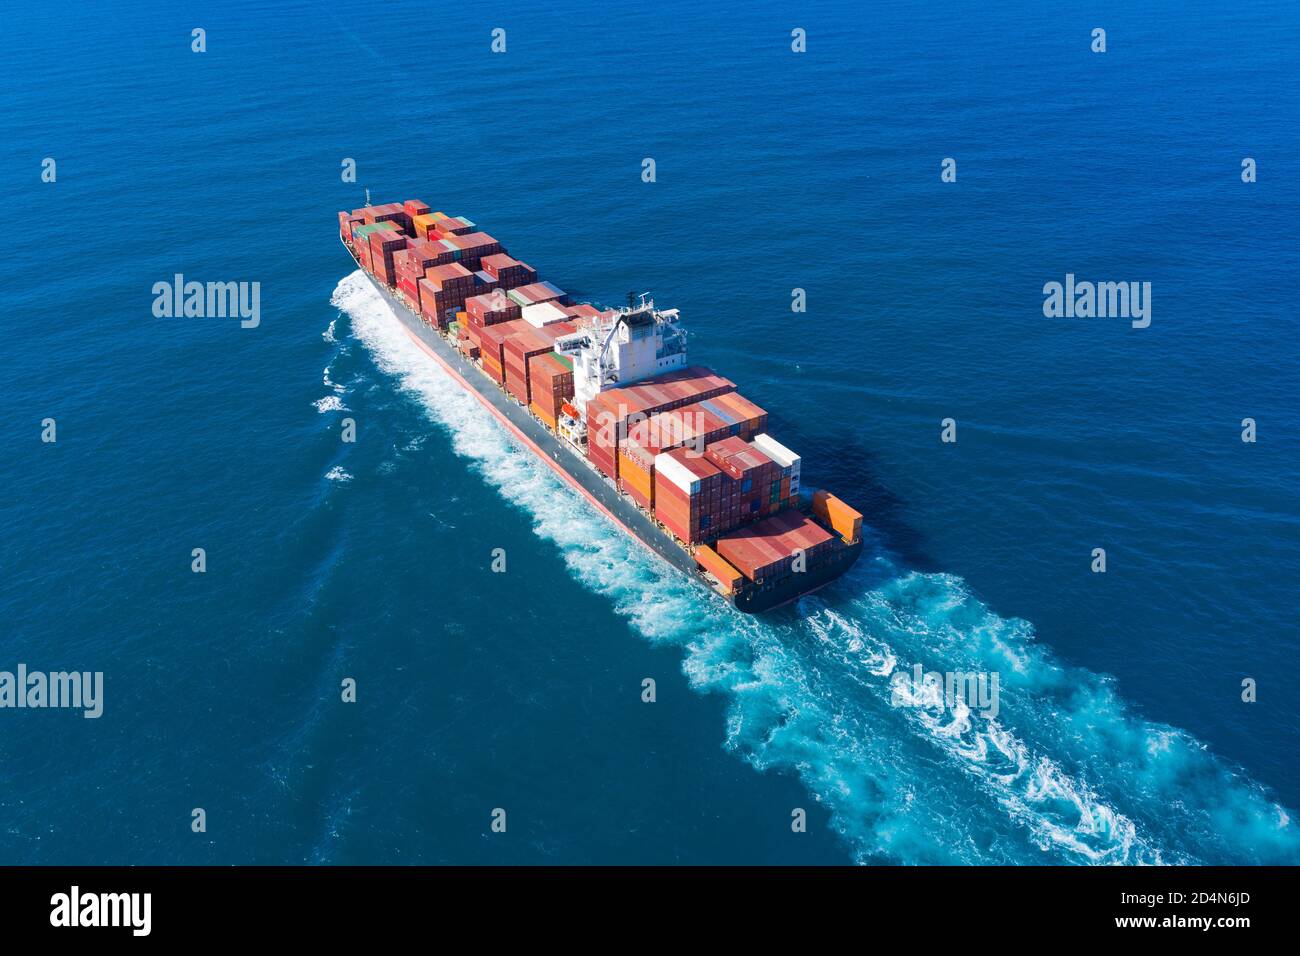 Zim Tarragona loaded Container ship cruising away from port, Aerial view. Stock Photo